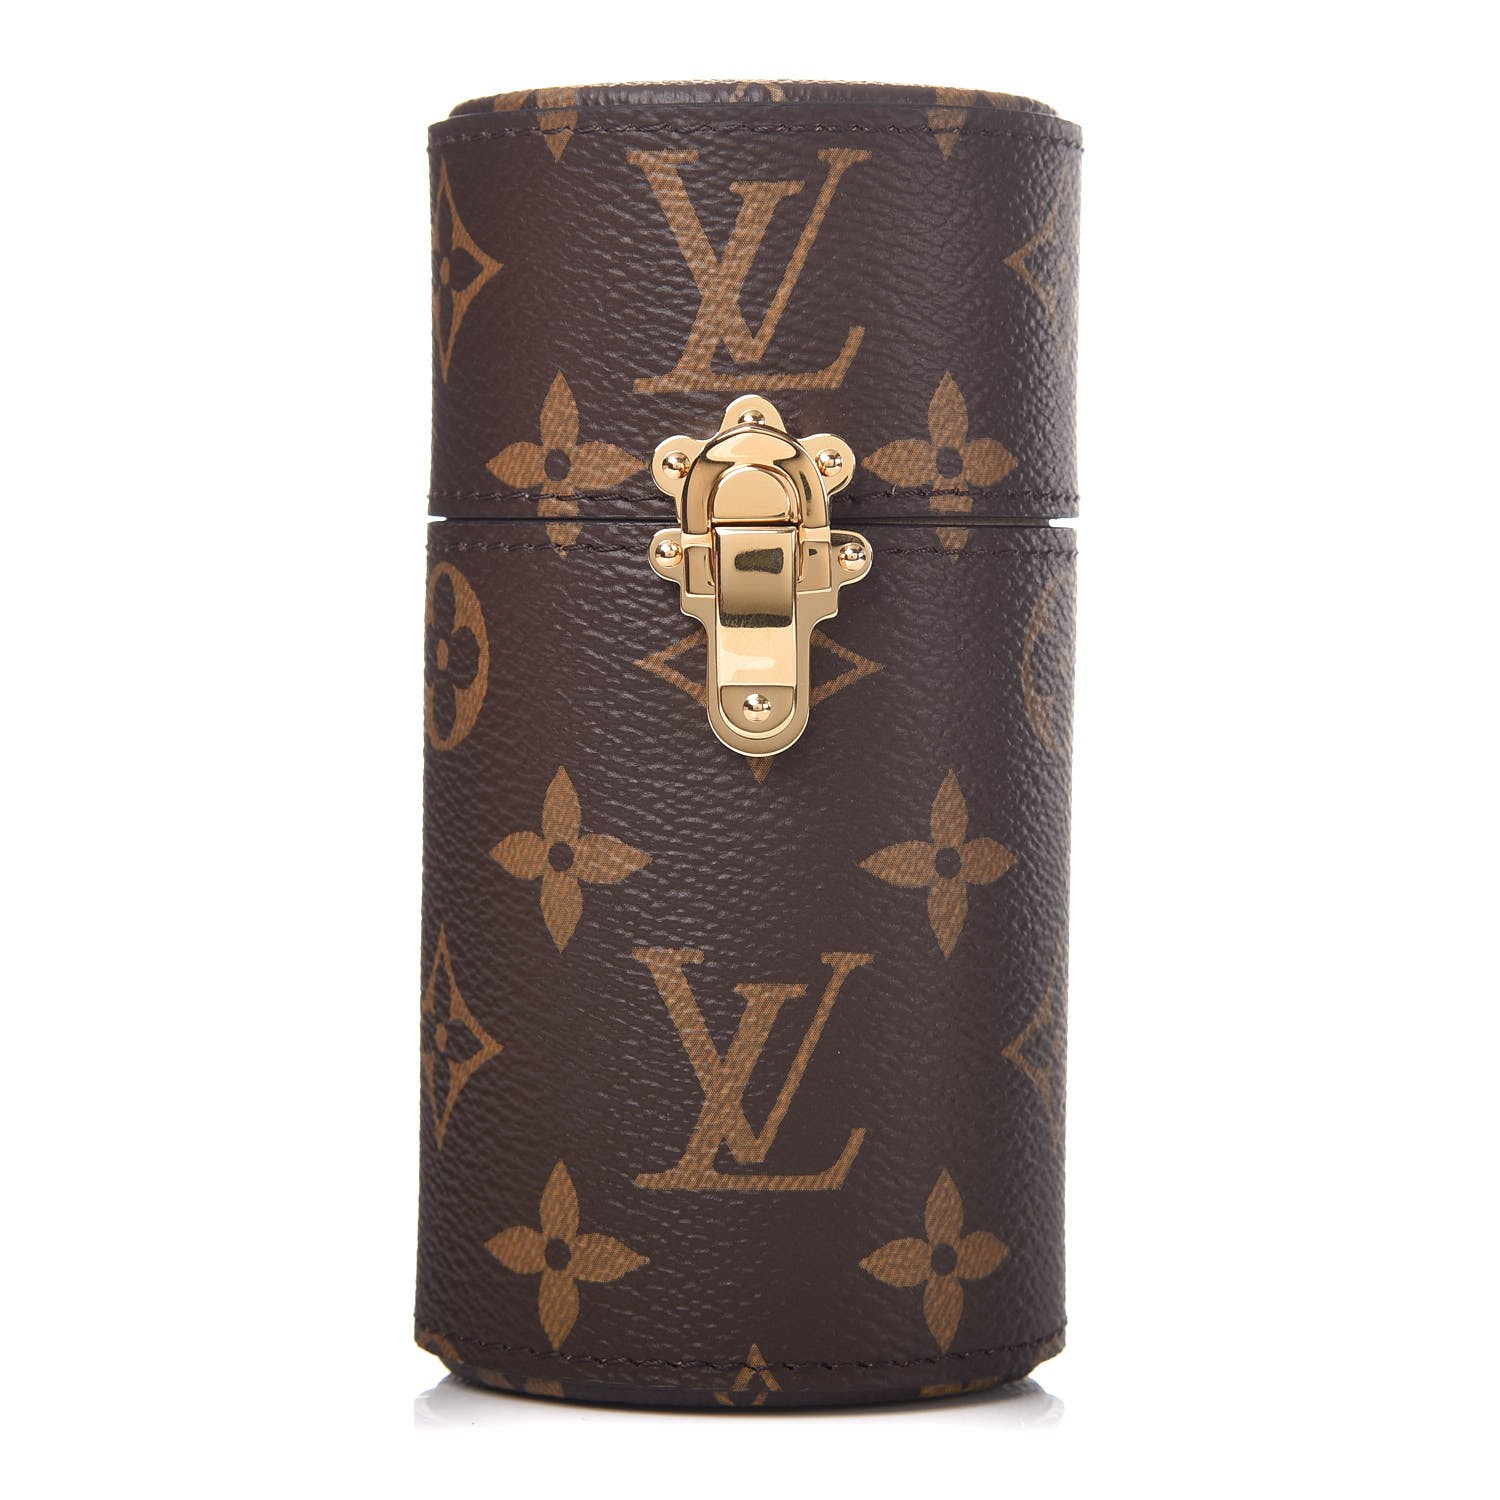 Outlet Louis Vuitton Travel Accessories Collection Products | IQS Executive